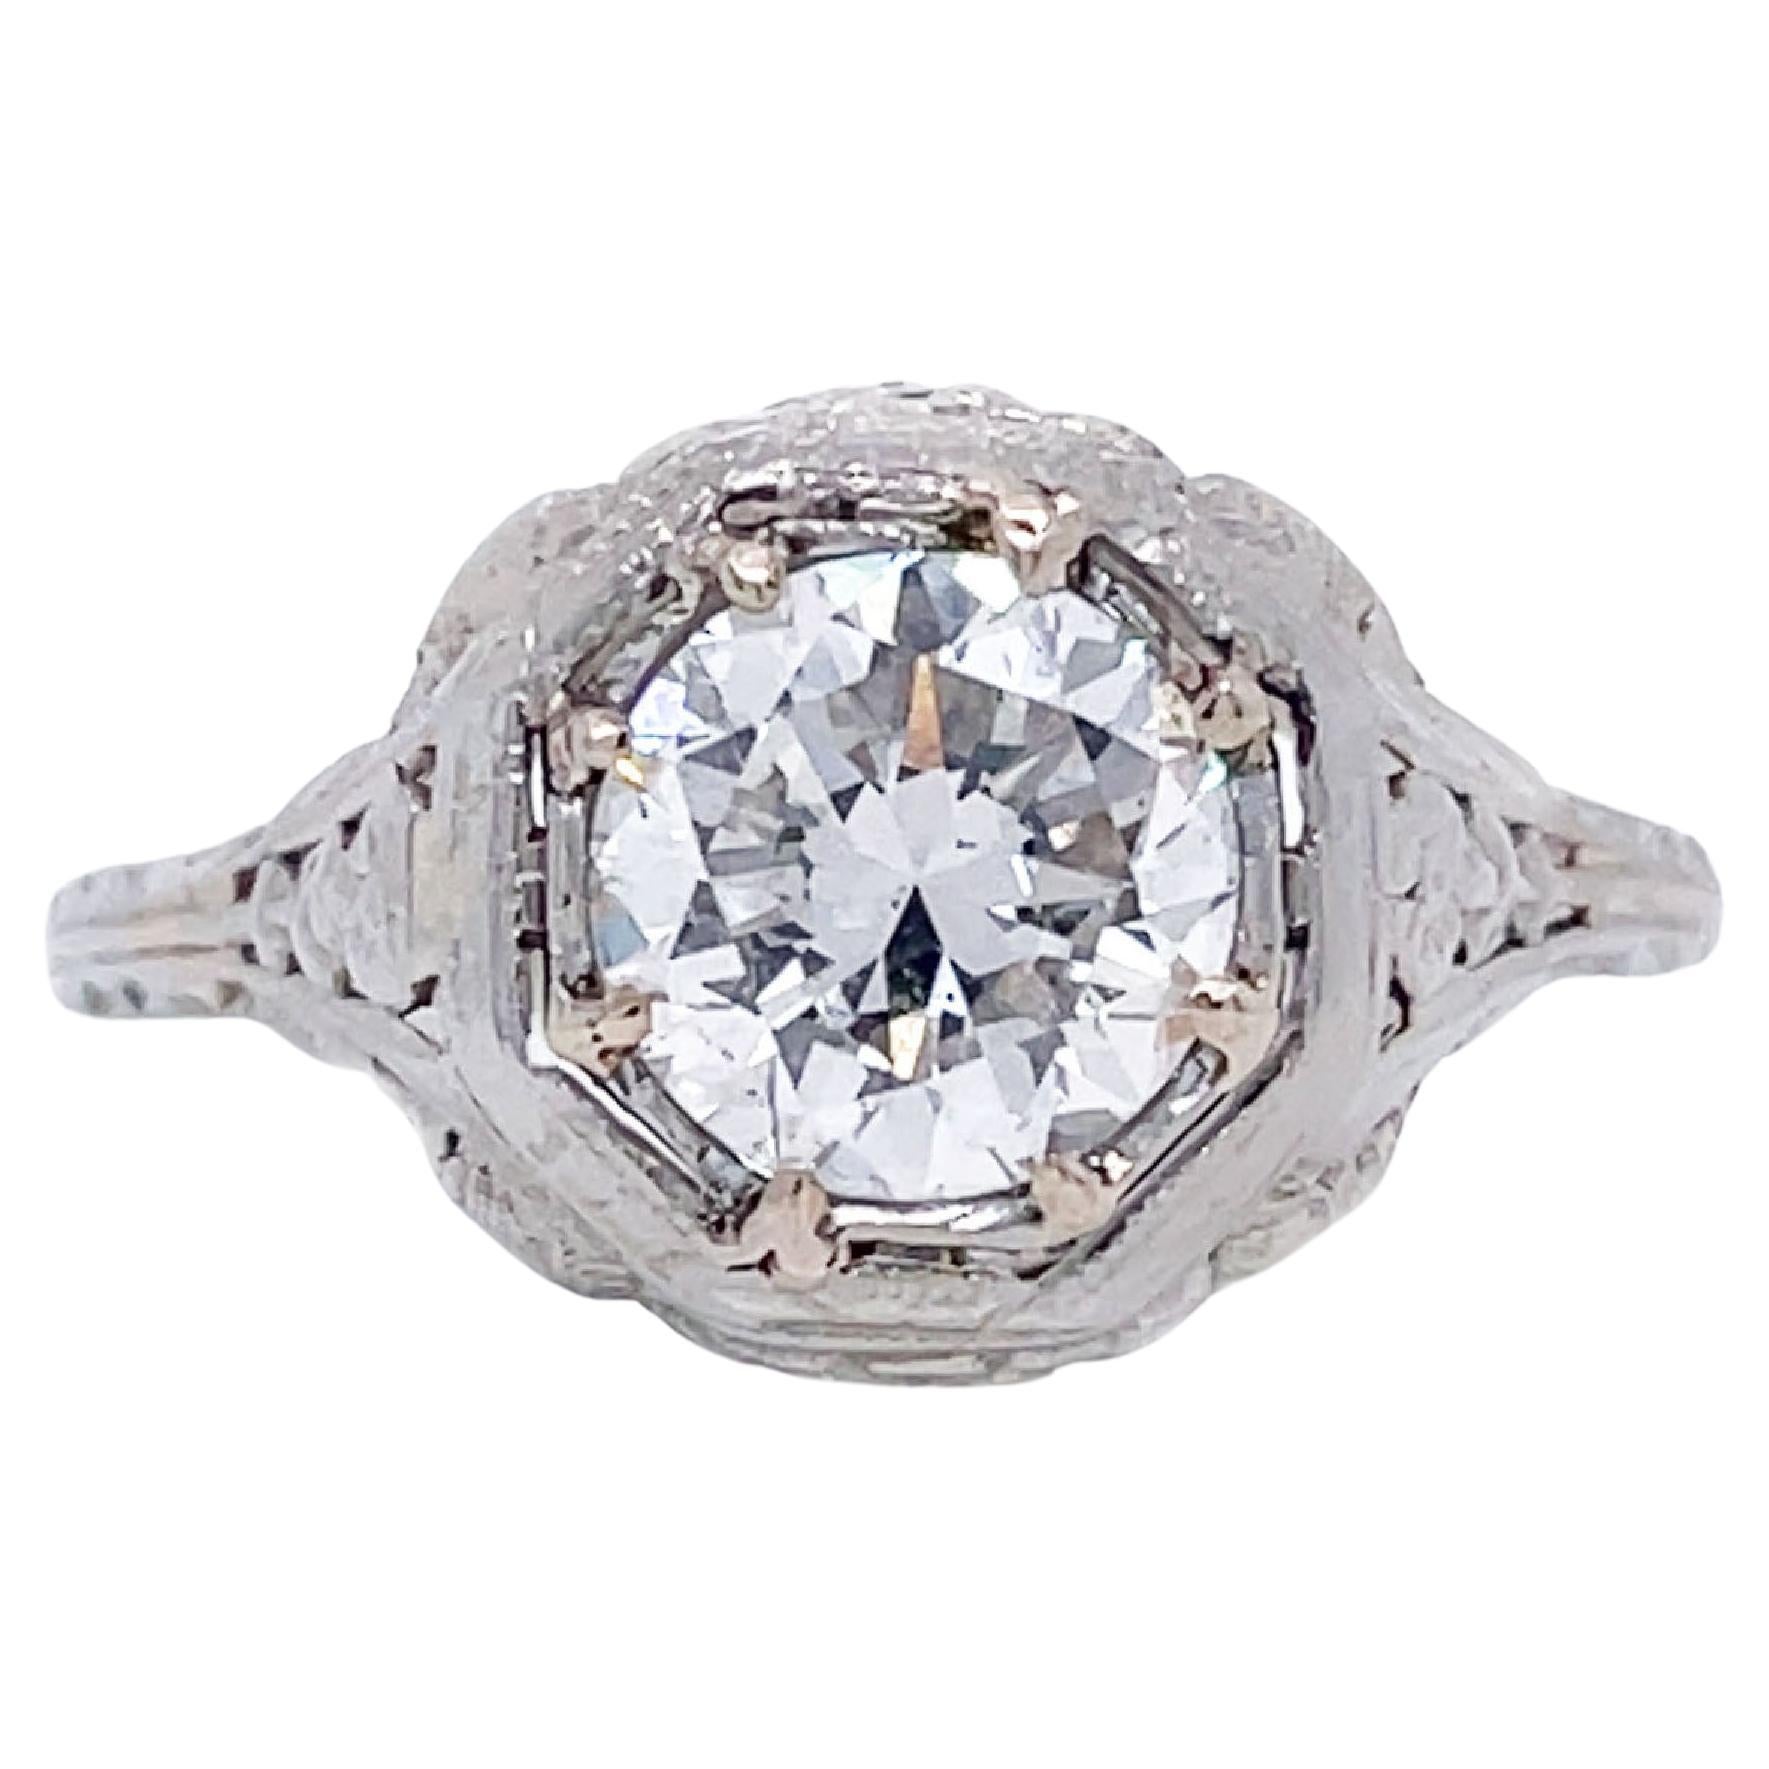 1920s 18K White Gold Filigree Diamond Love Bird Ring with GIA Report For Sale